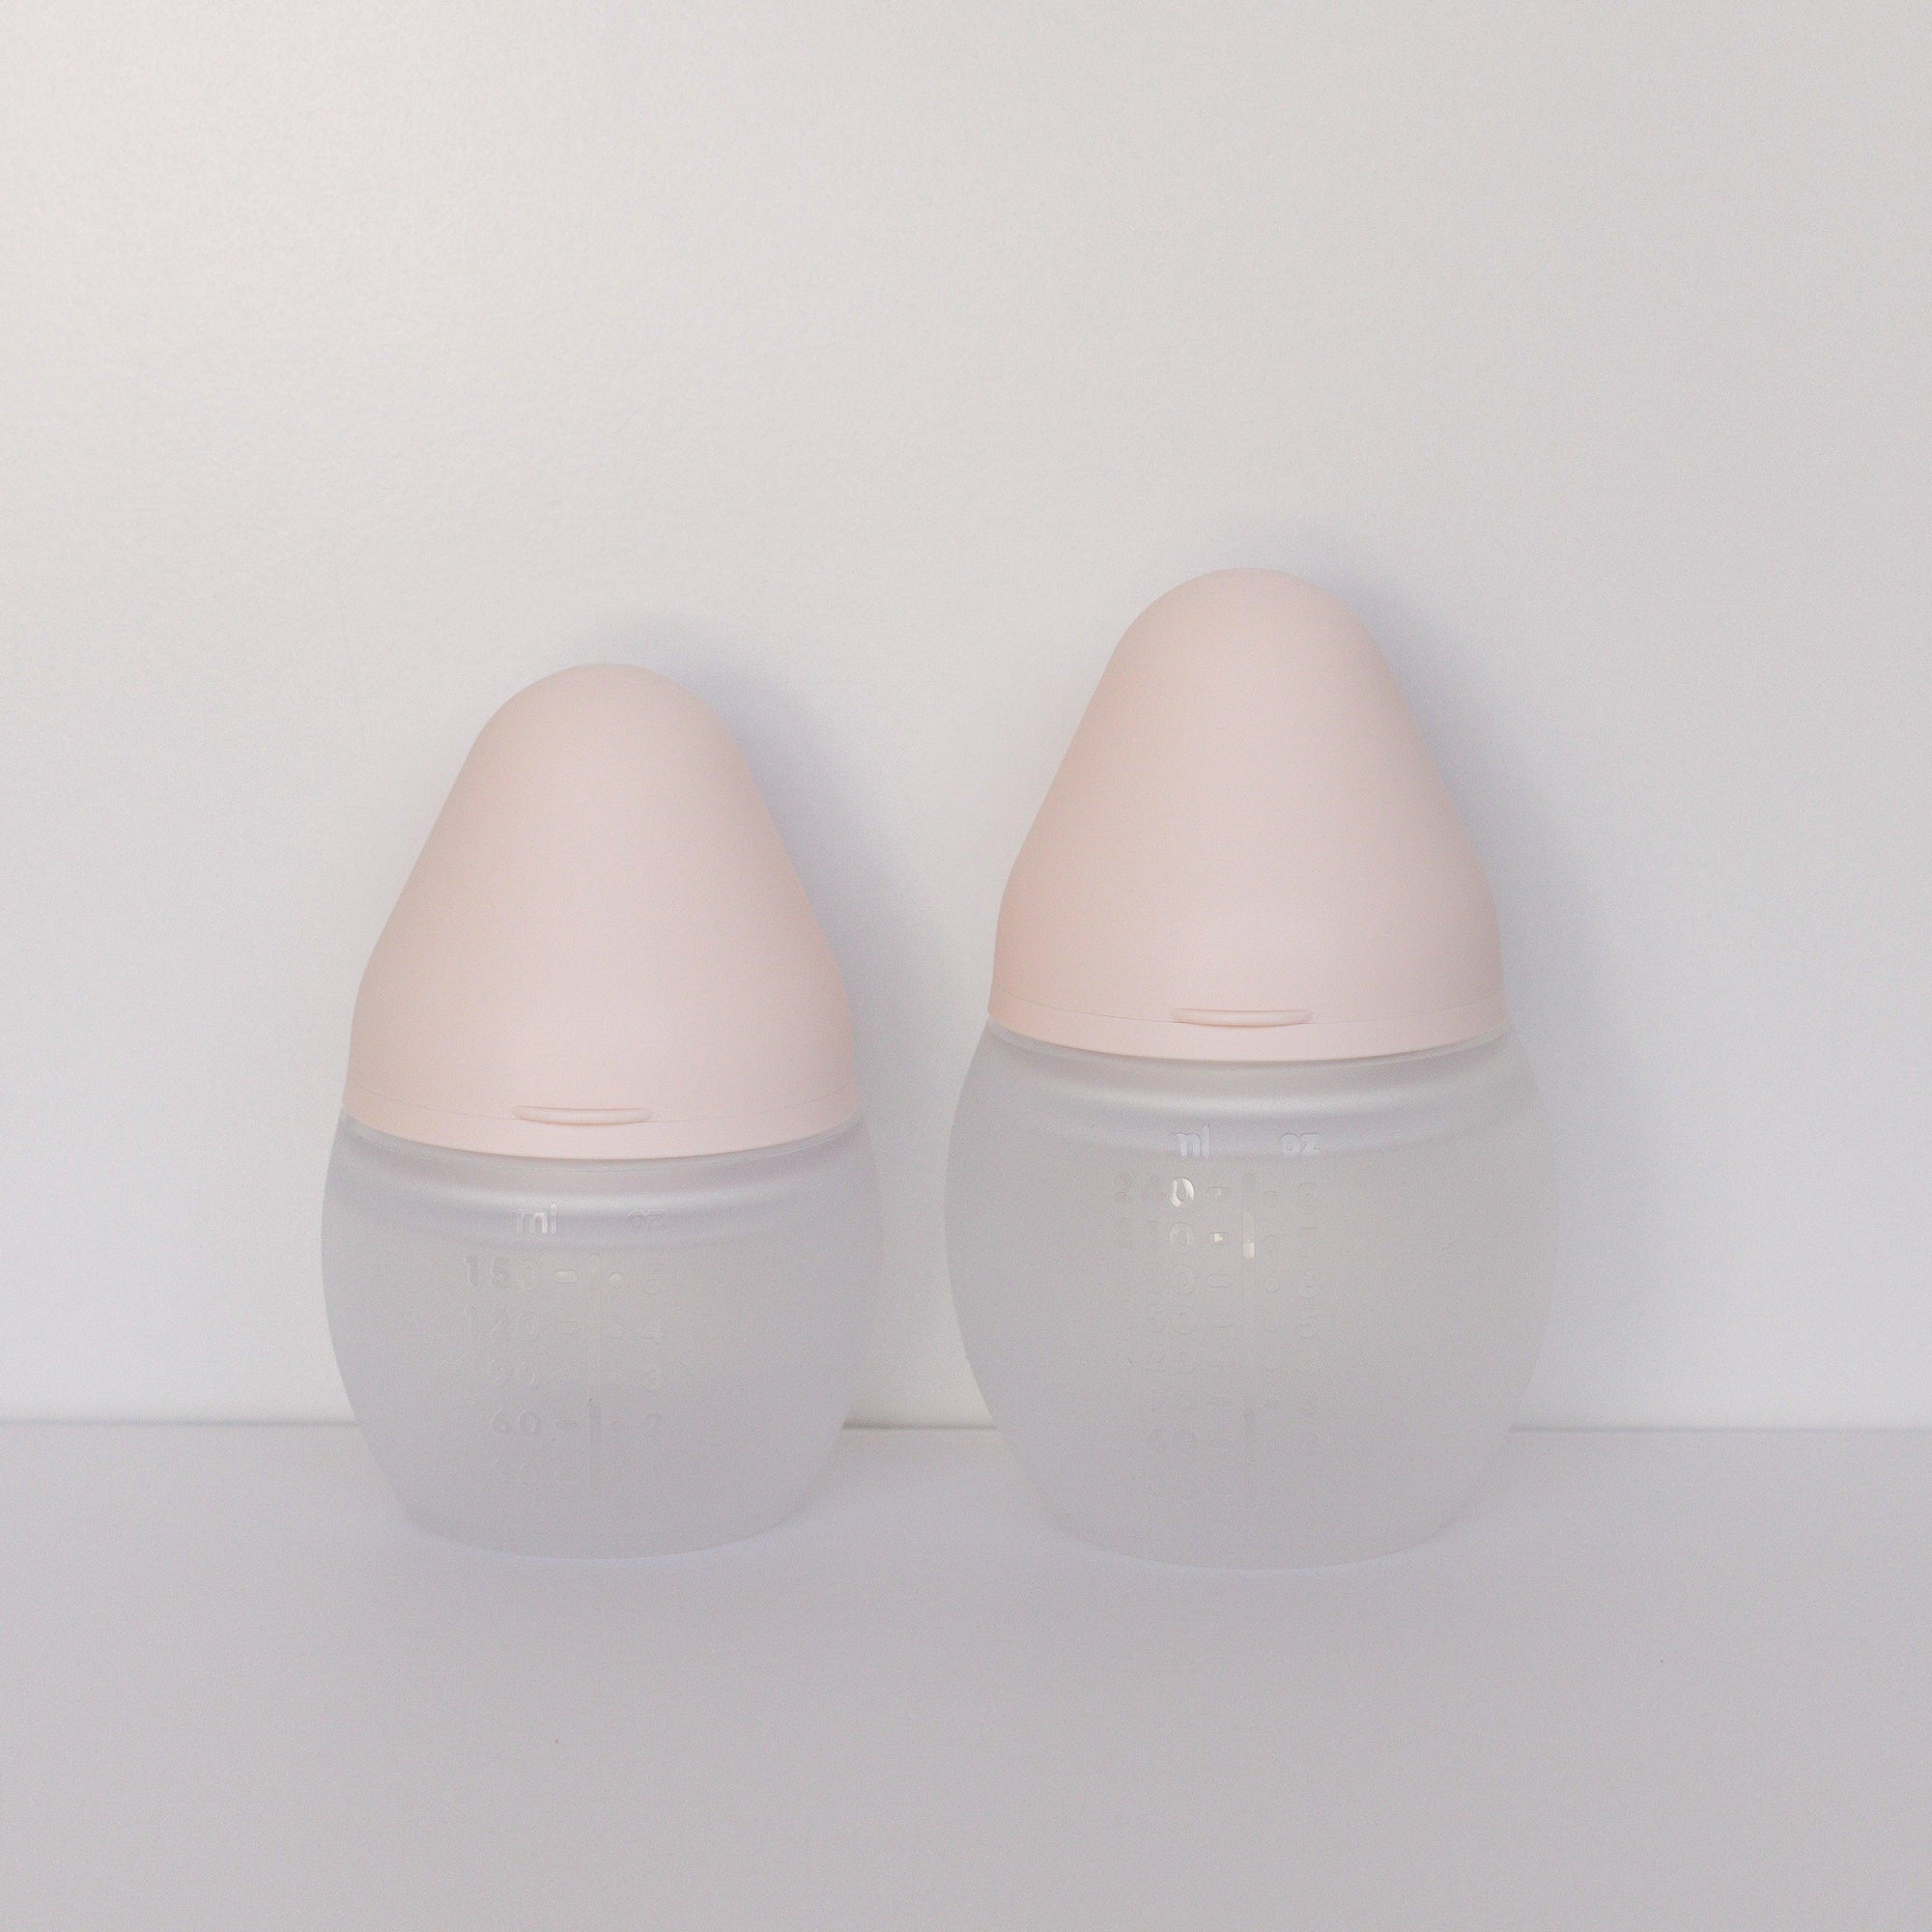 Two Elhée France BibRond bottles in the shade nude standing against a white surface.